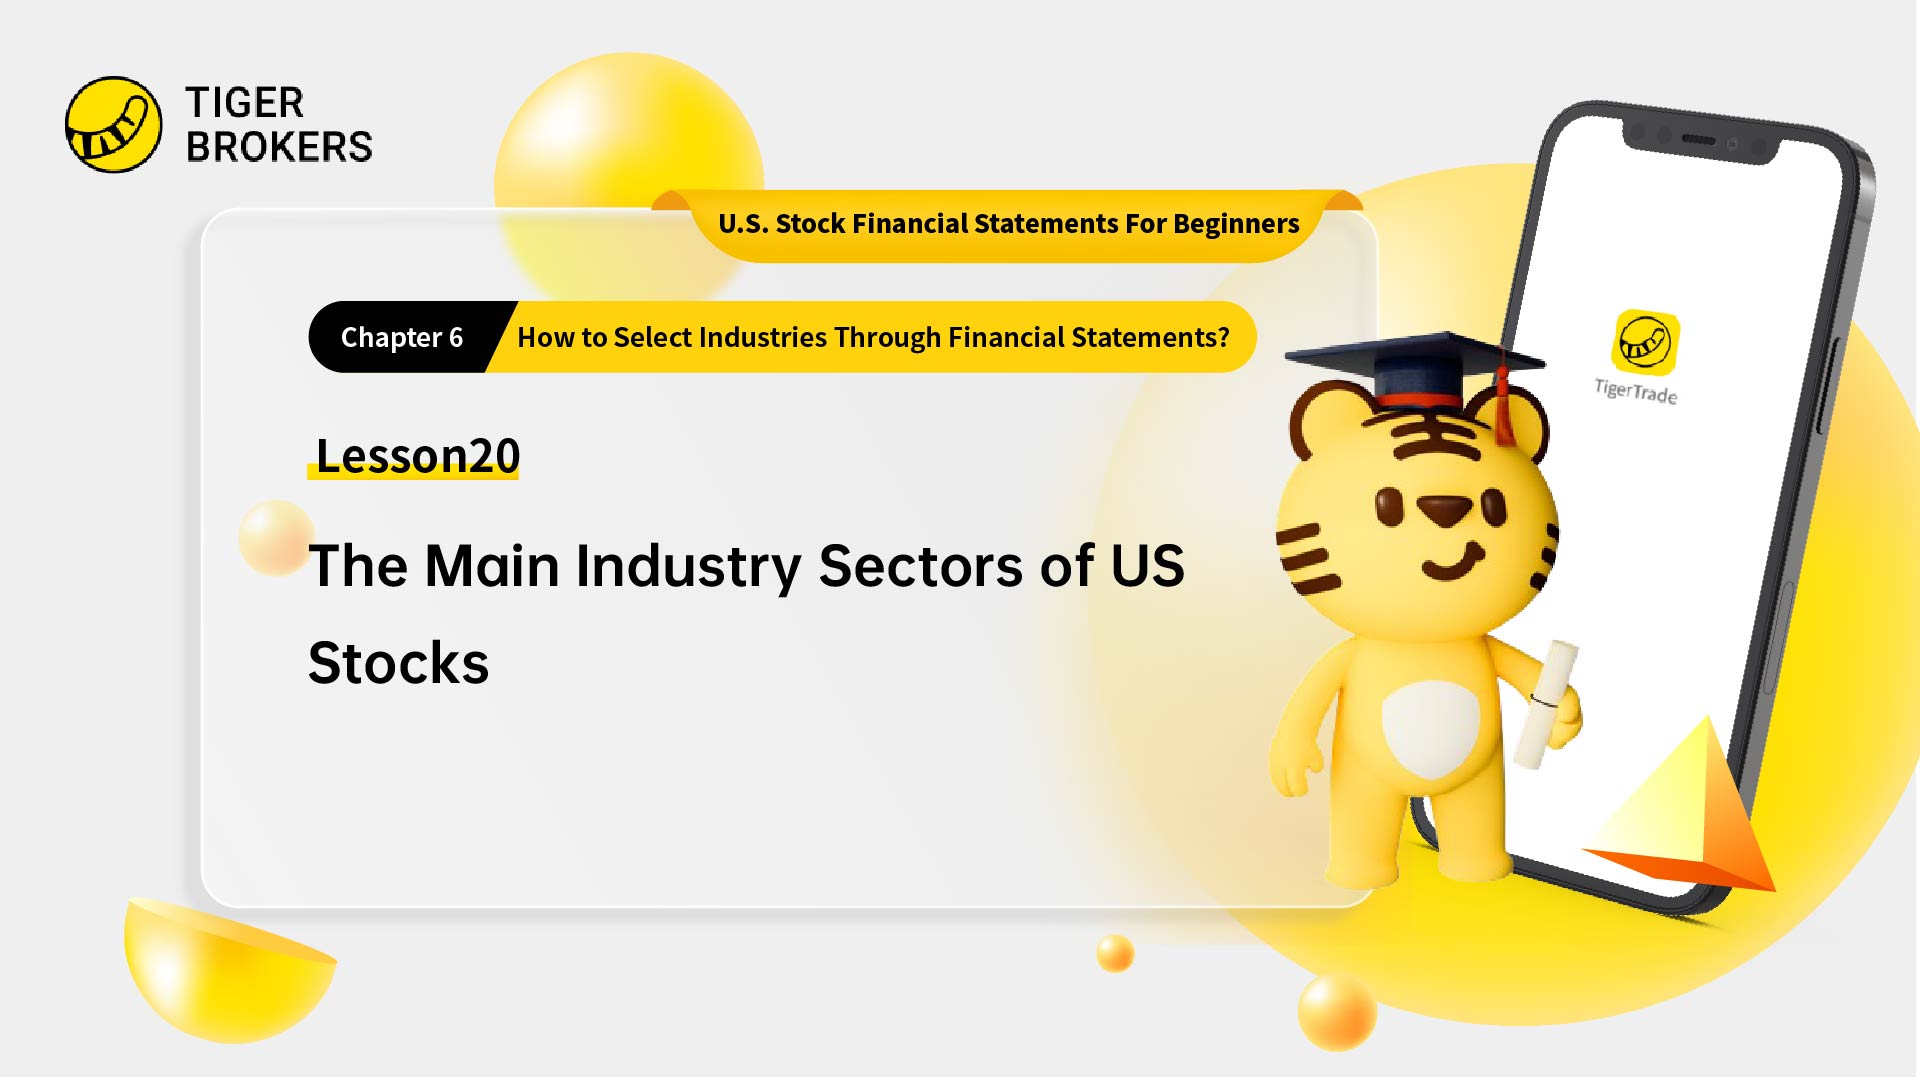 Lesson 20: The main industry sectors of US stocks